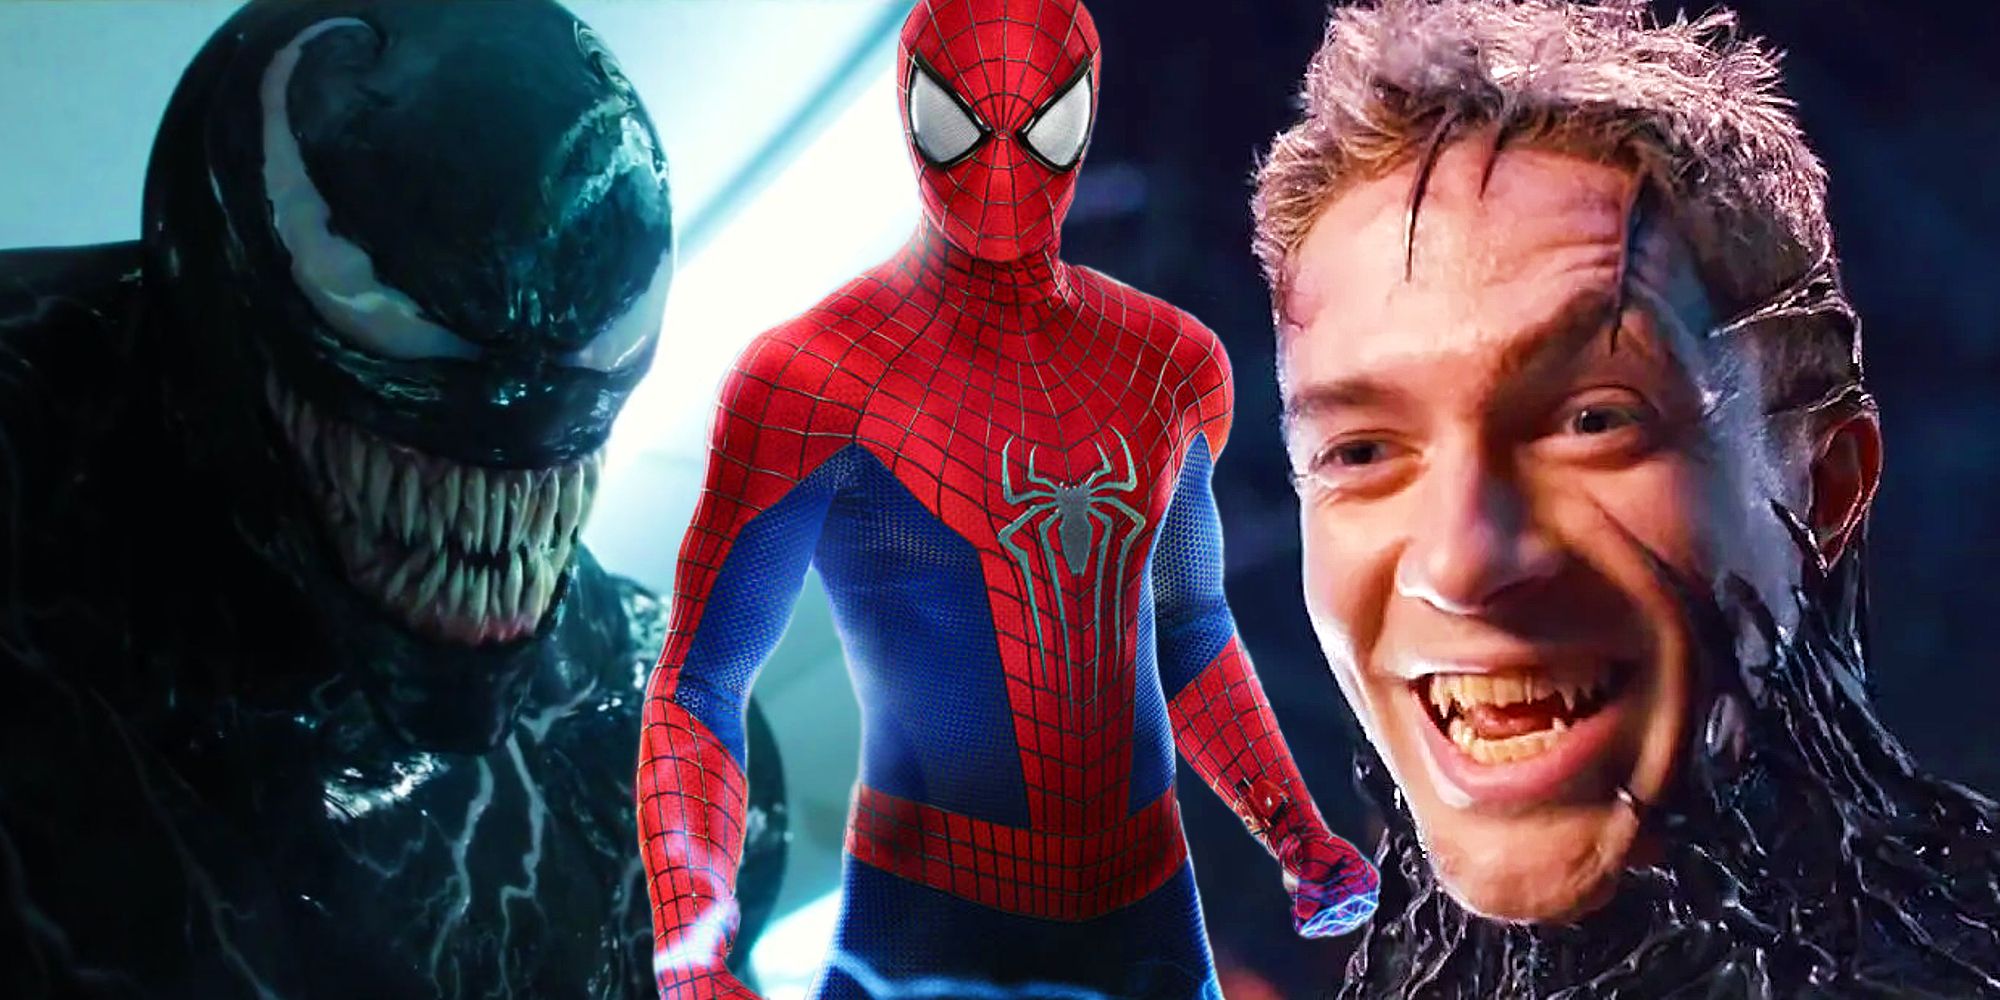 Venom from the 2018 movie and Topher Grace's Spider-Man 3 Venom either side of Andrew Garfield's Amazing Spider-Man